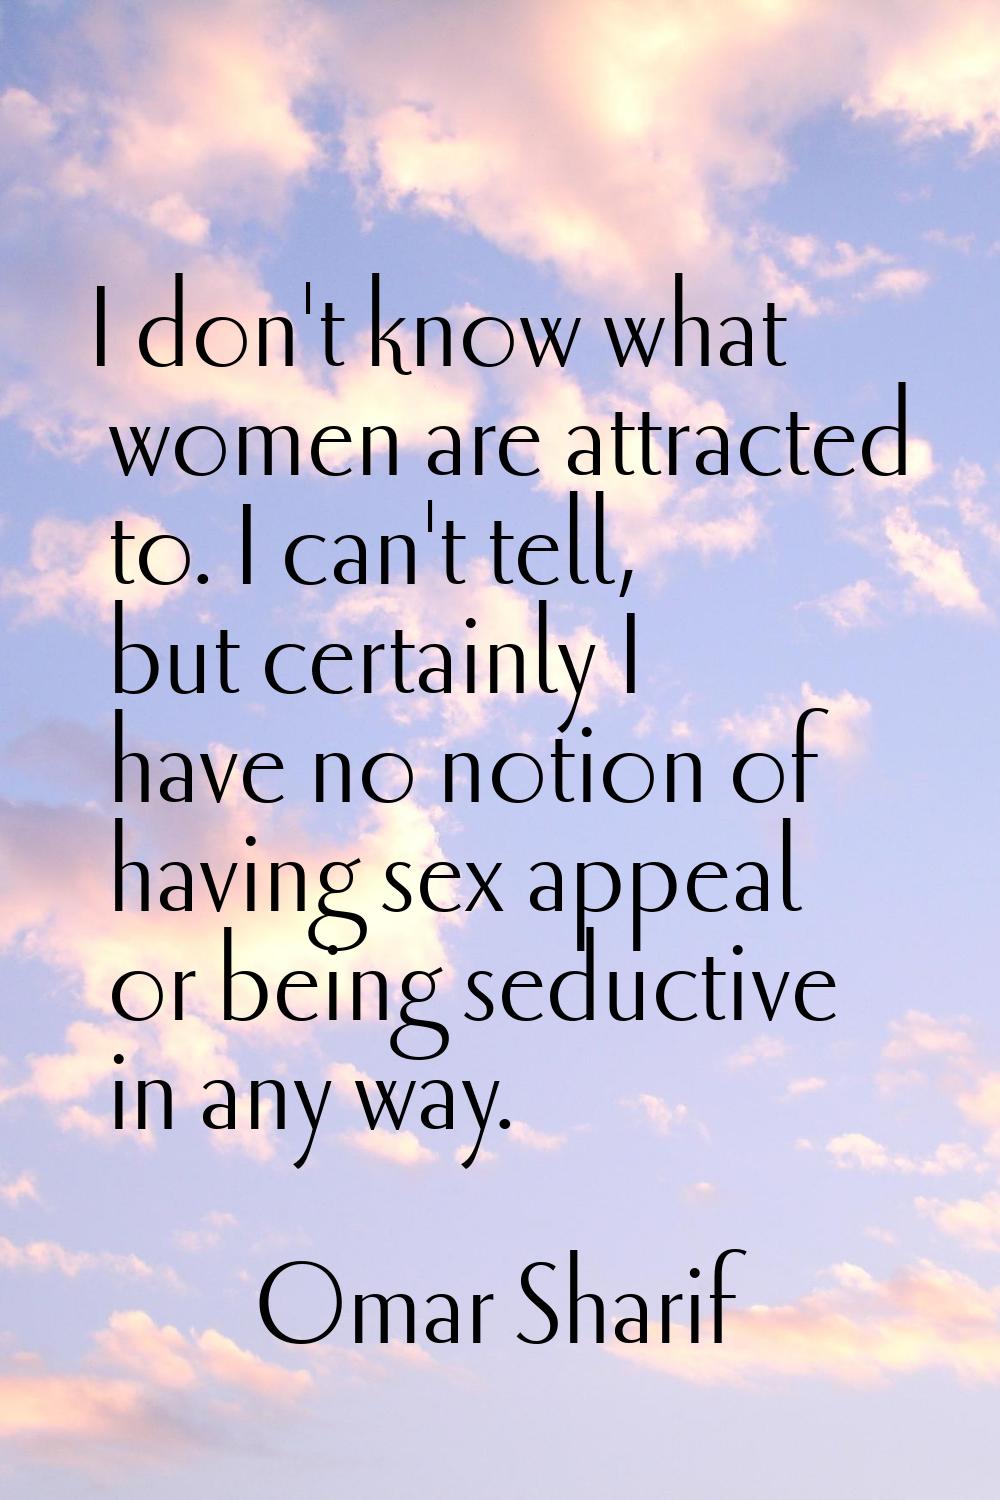 I don't know what women are attracted to. I can't tell, but certainly I have no notion of having se